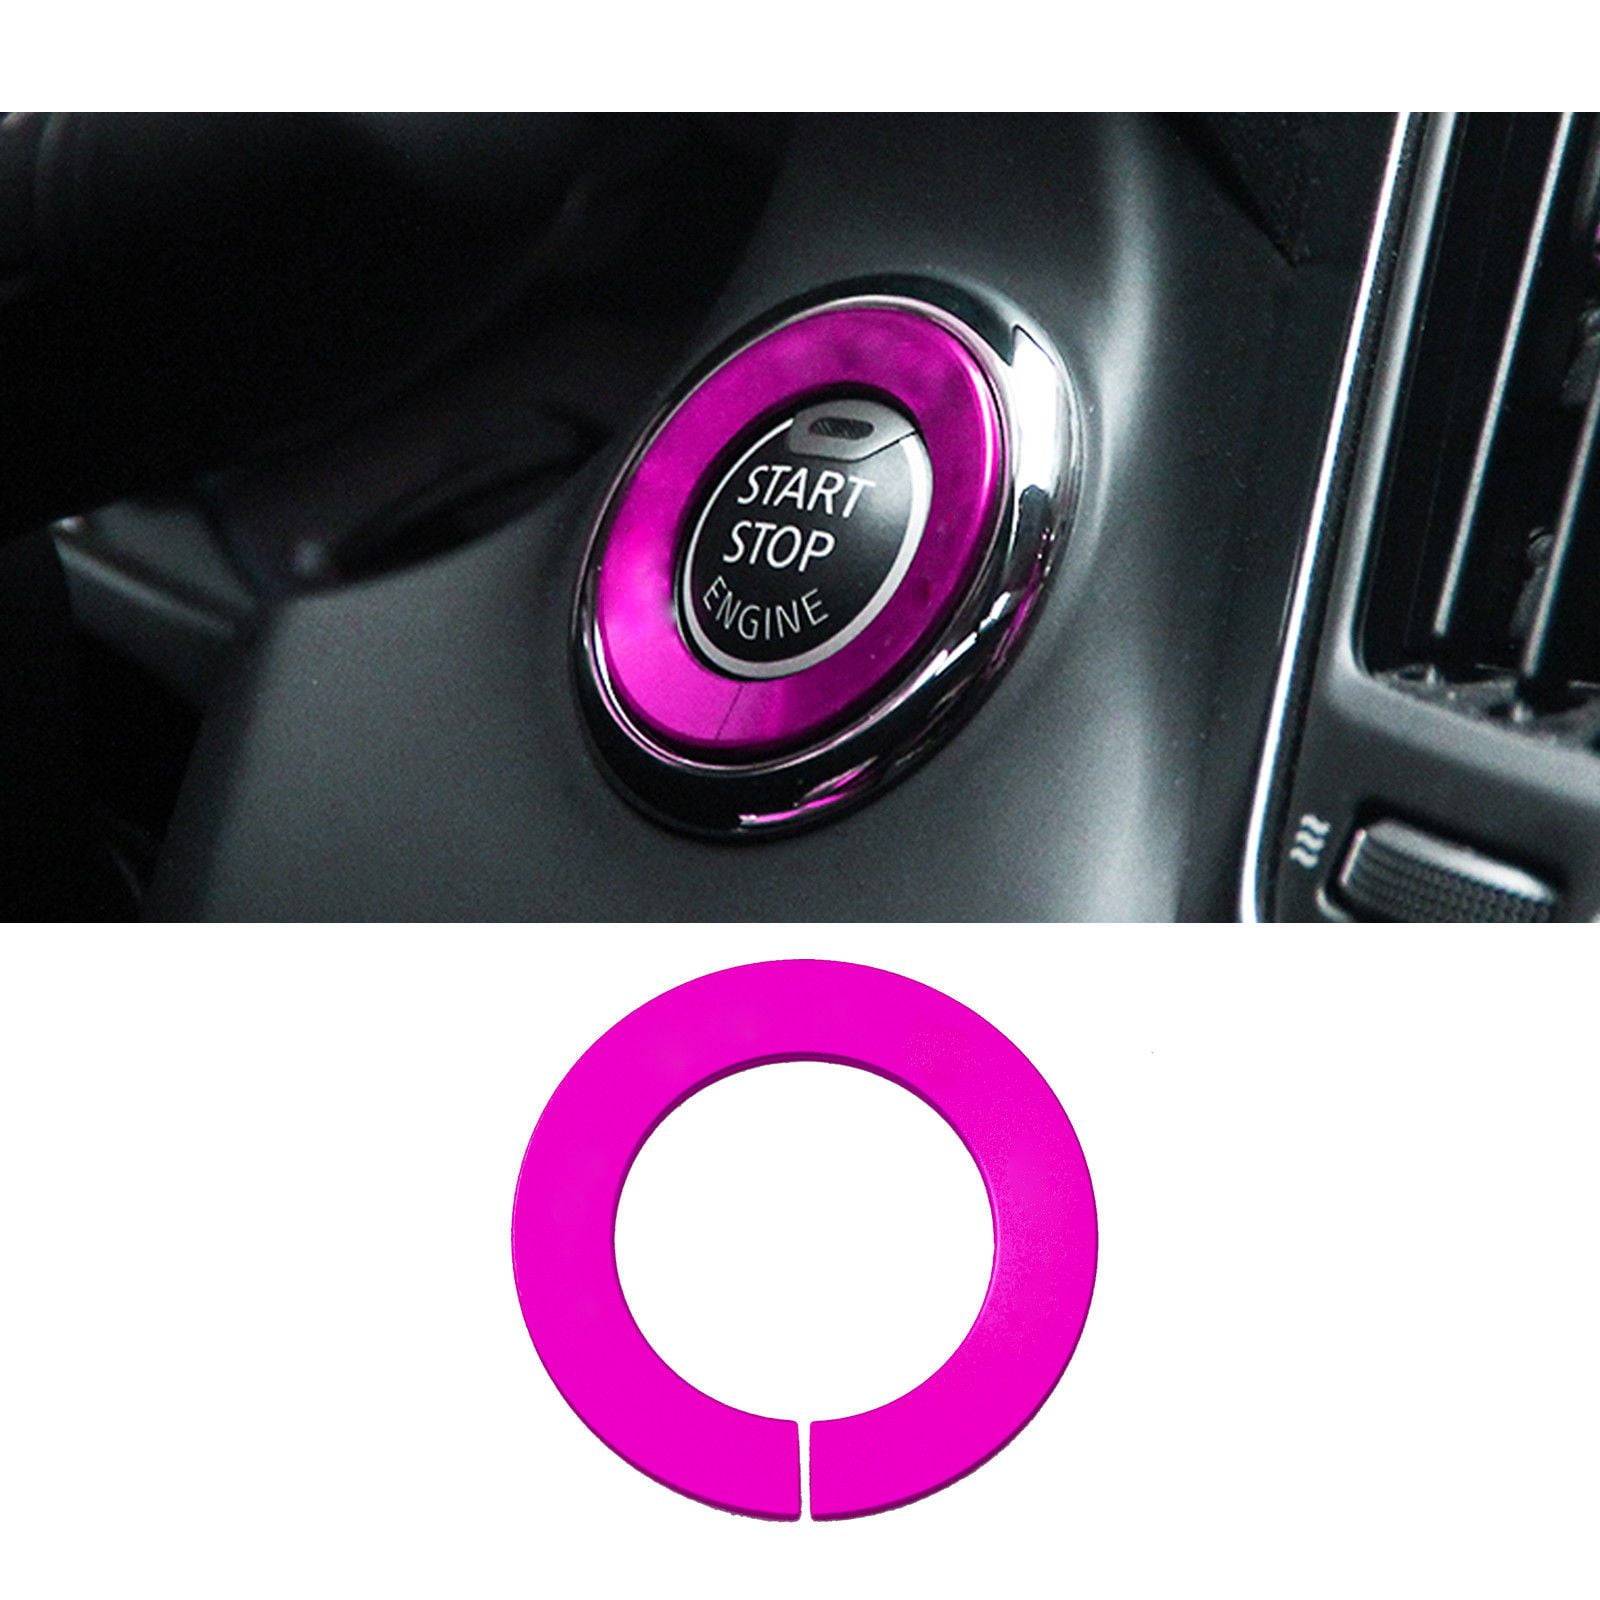 Ignition Switch Button Cover Bling Car Interior Accessories Decoration RZ-CIV 4PCS Car Engine Start Button Cover Ring Trim with 1PCS Push Start Stop Button Cover Logo